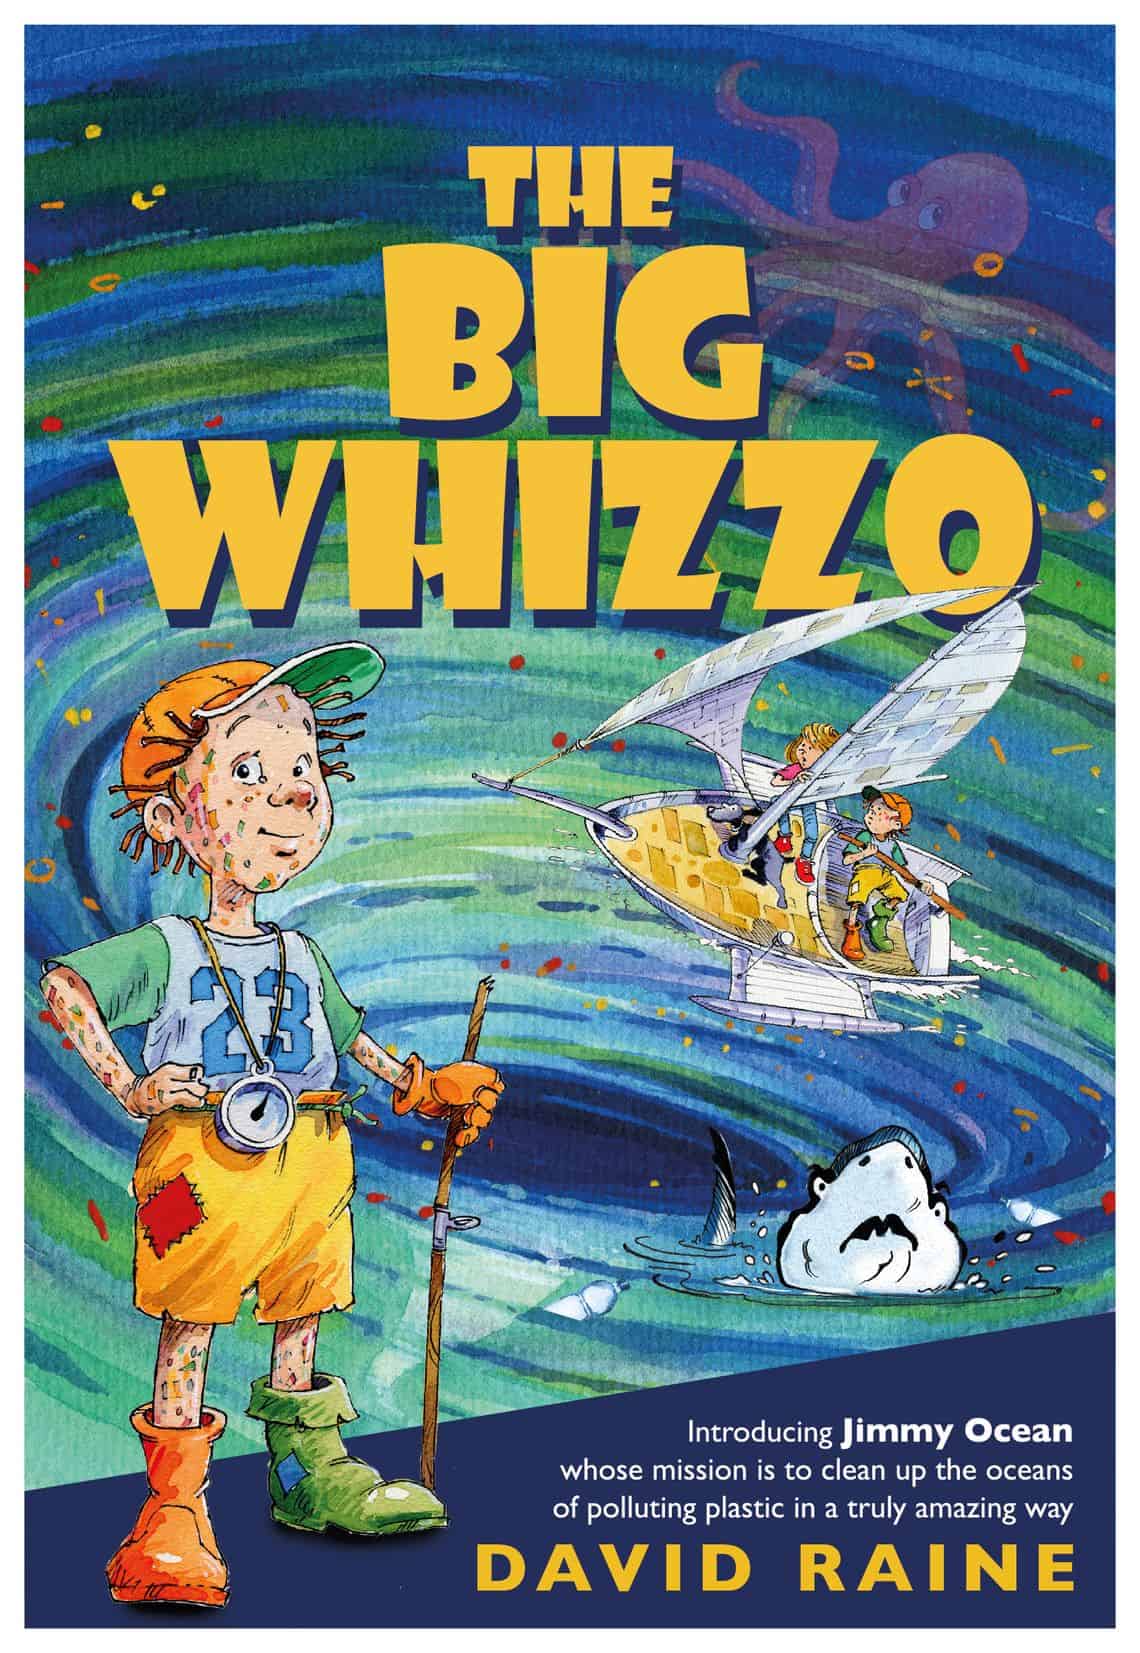 Behind 'The Big Whizzo' and The Jimmy Ocean Project